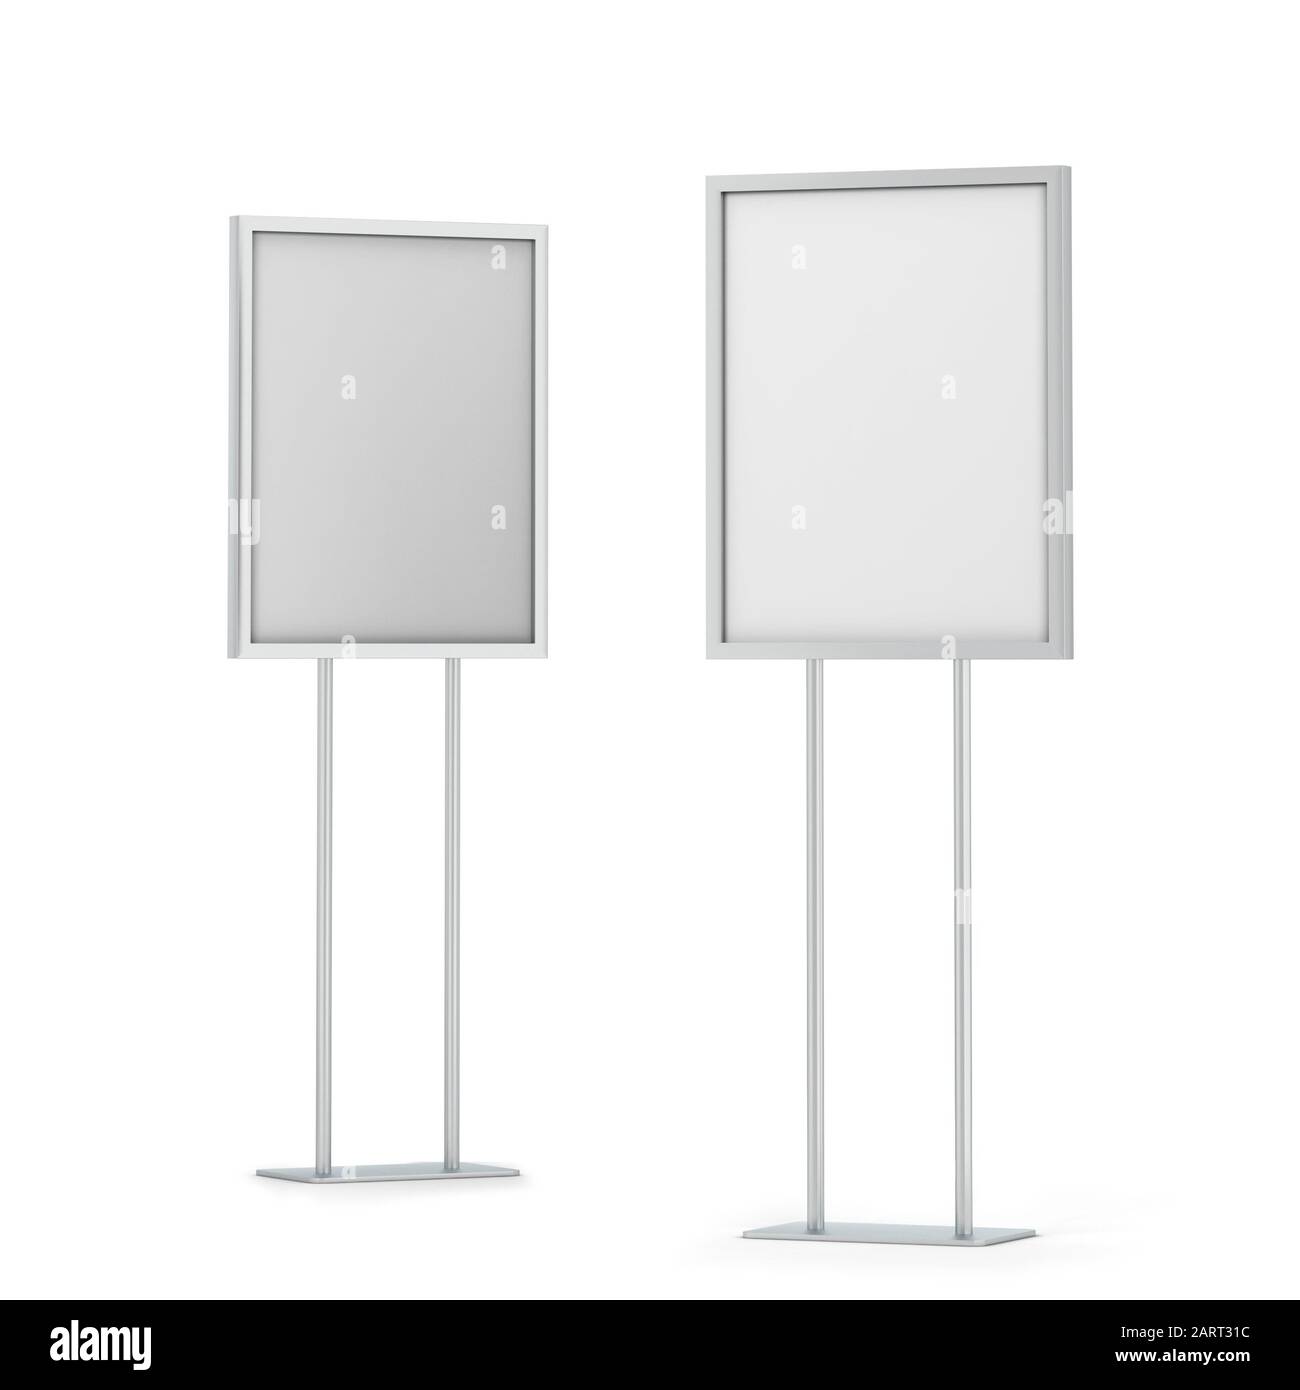 Blank poster stand mockup. 3d illustration isolated on white background Stock Photo